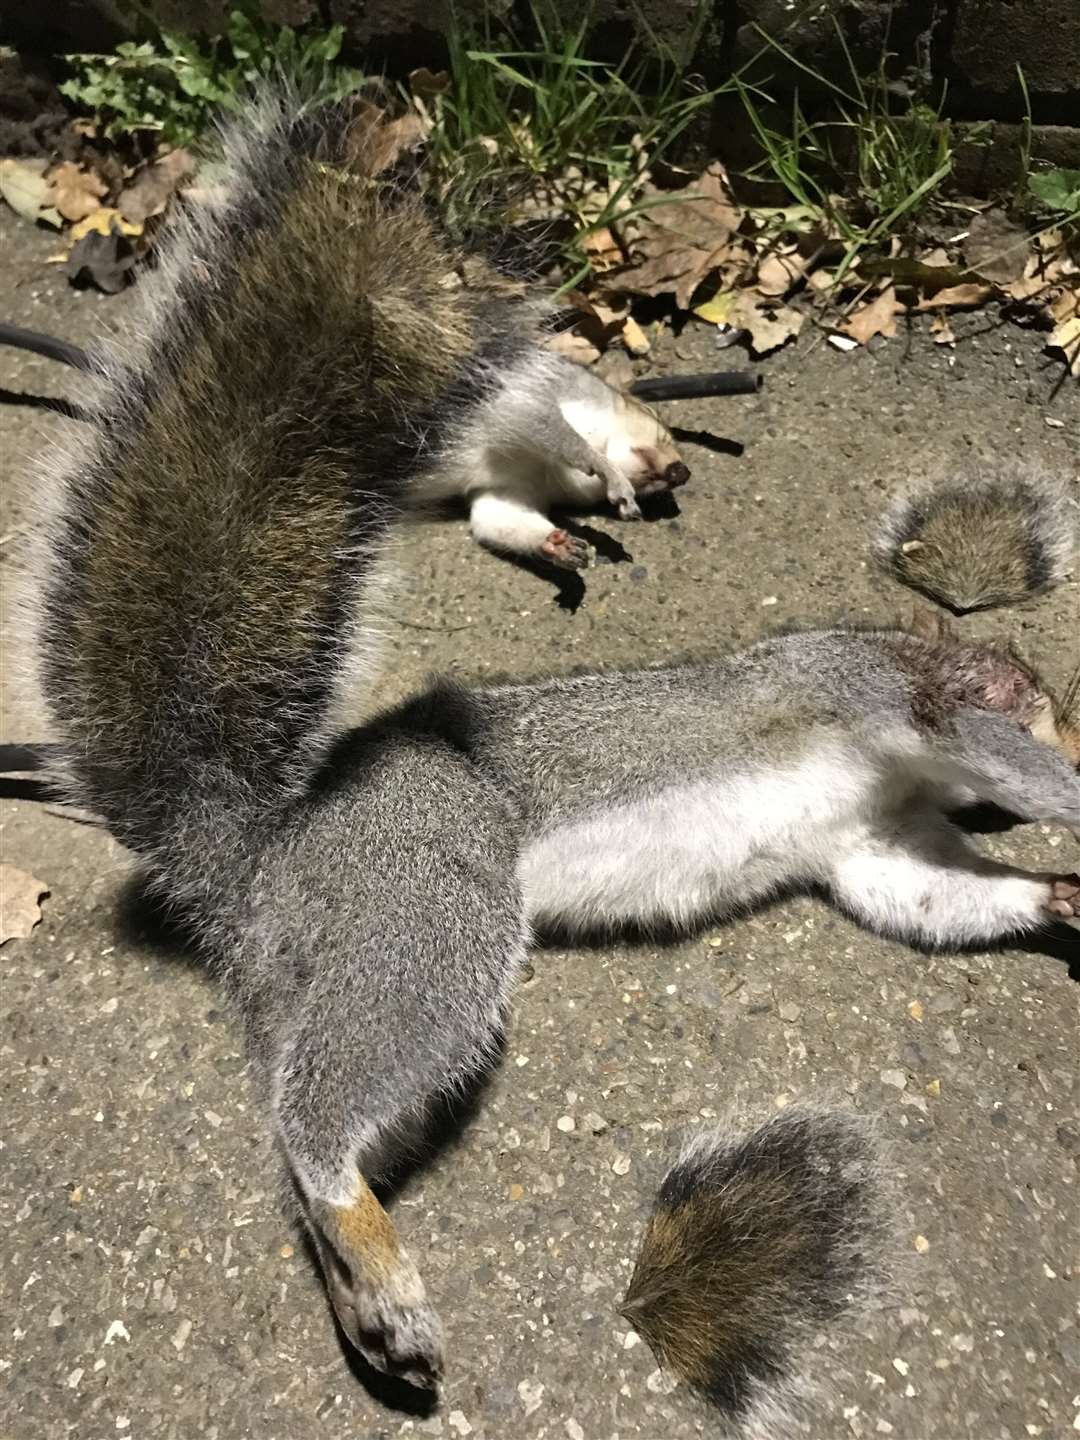 The tips of the squirrels' tails had been cut off